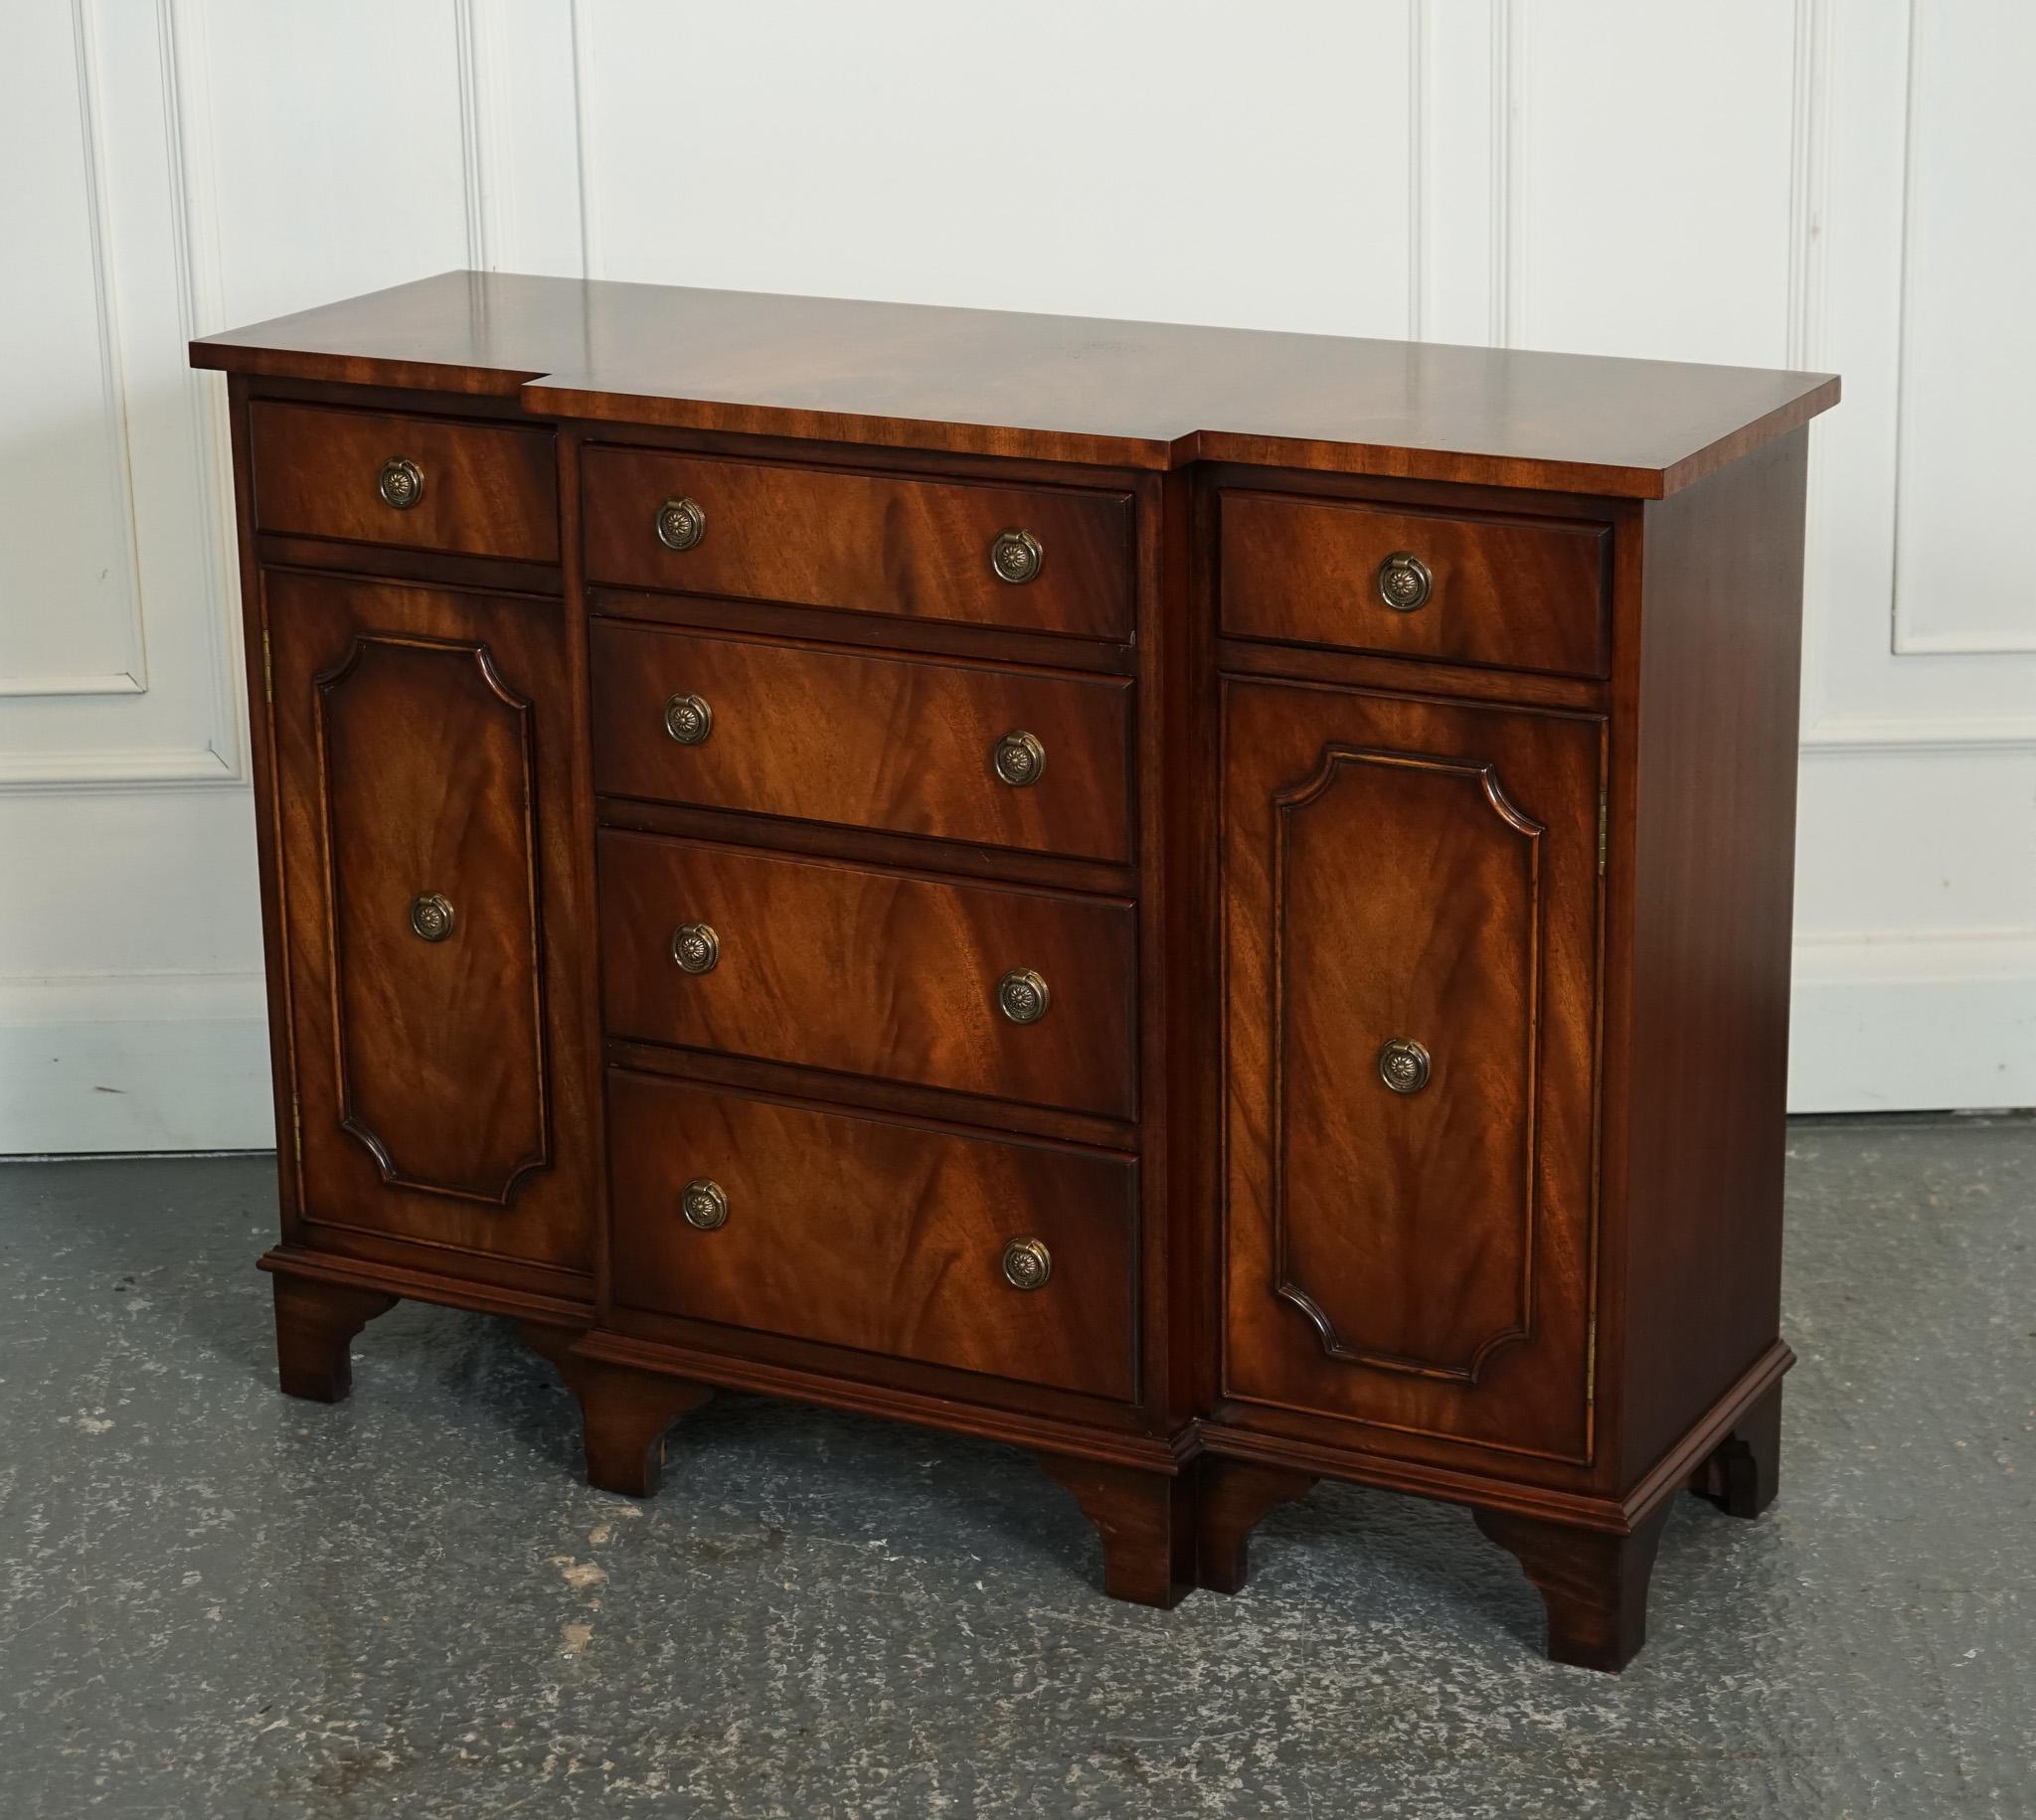 
We are delighted to offer for sale this Lovely Bevan Funnell Georgian Style Flamed Hardwood Sideboard.

The Lovely Bevan Funnel Georgian style flamed hardwood buffet sideboard is a stunning piece of furniture. It features a beautiful flamed